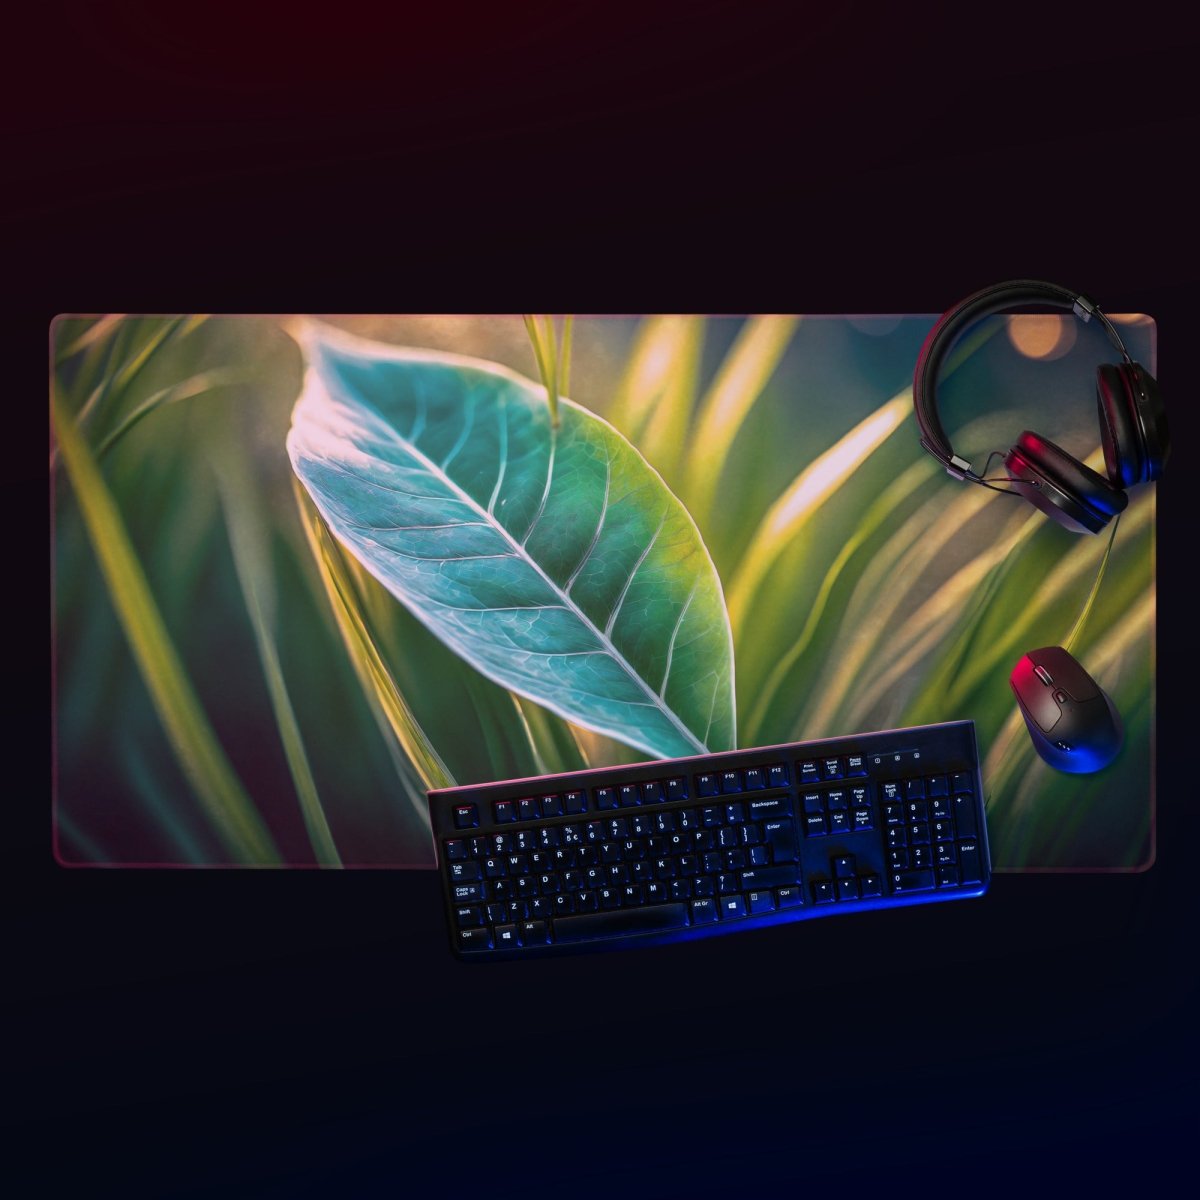 Botanical leaf - Gaming mouse pad - Ever colorful